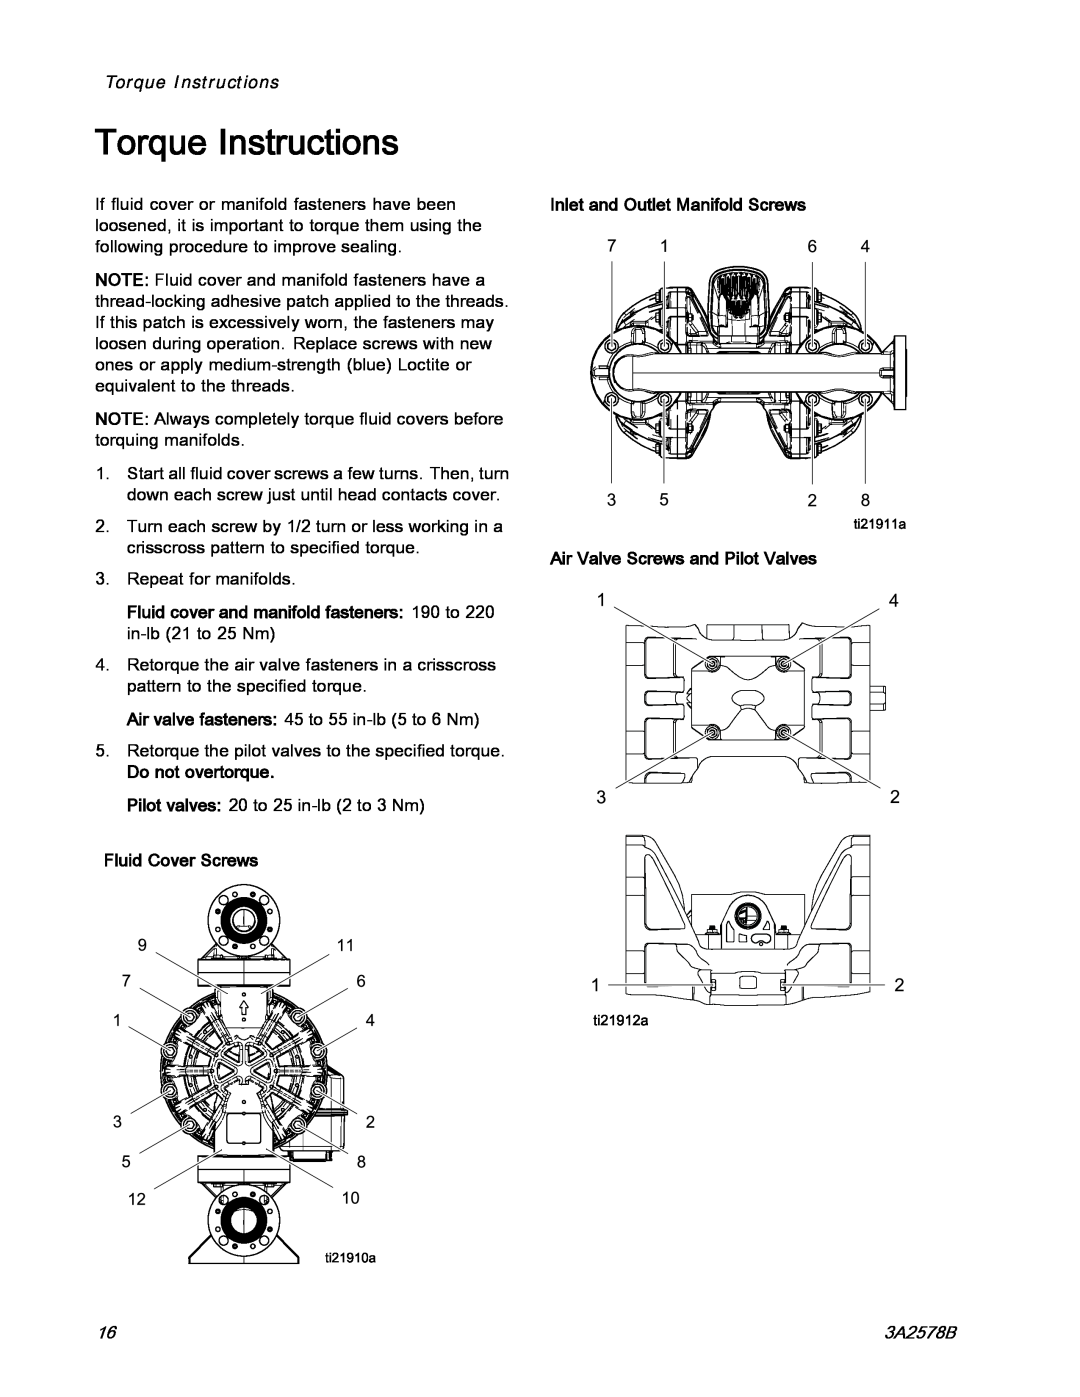 Graco 3A2578B Torque Instructions, Do not overtorque, Fluid Cover Screws, Inlet and Outlet Manifold Screws 